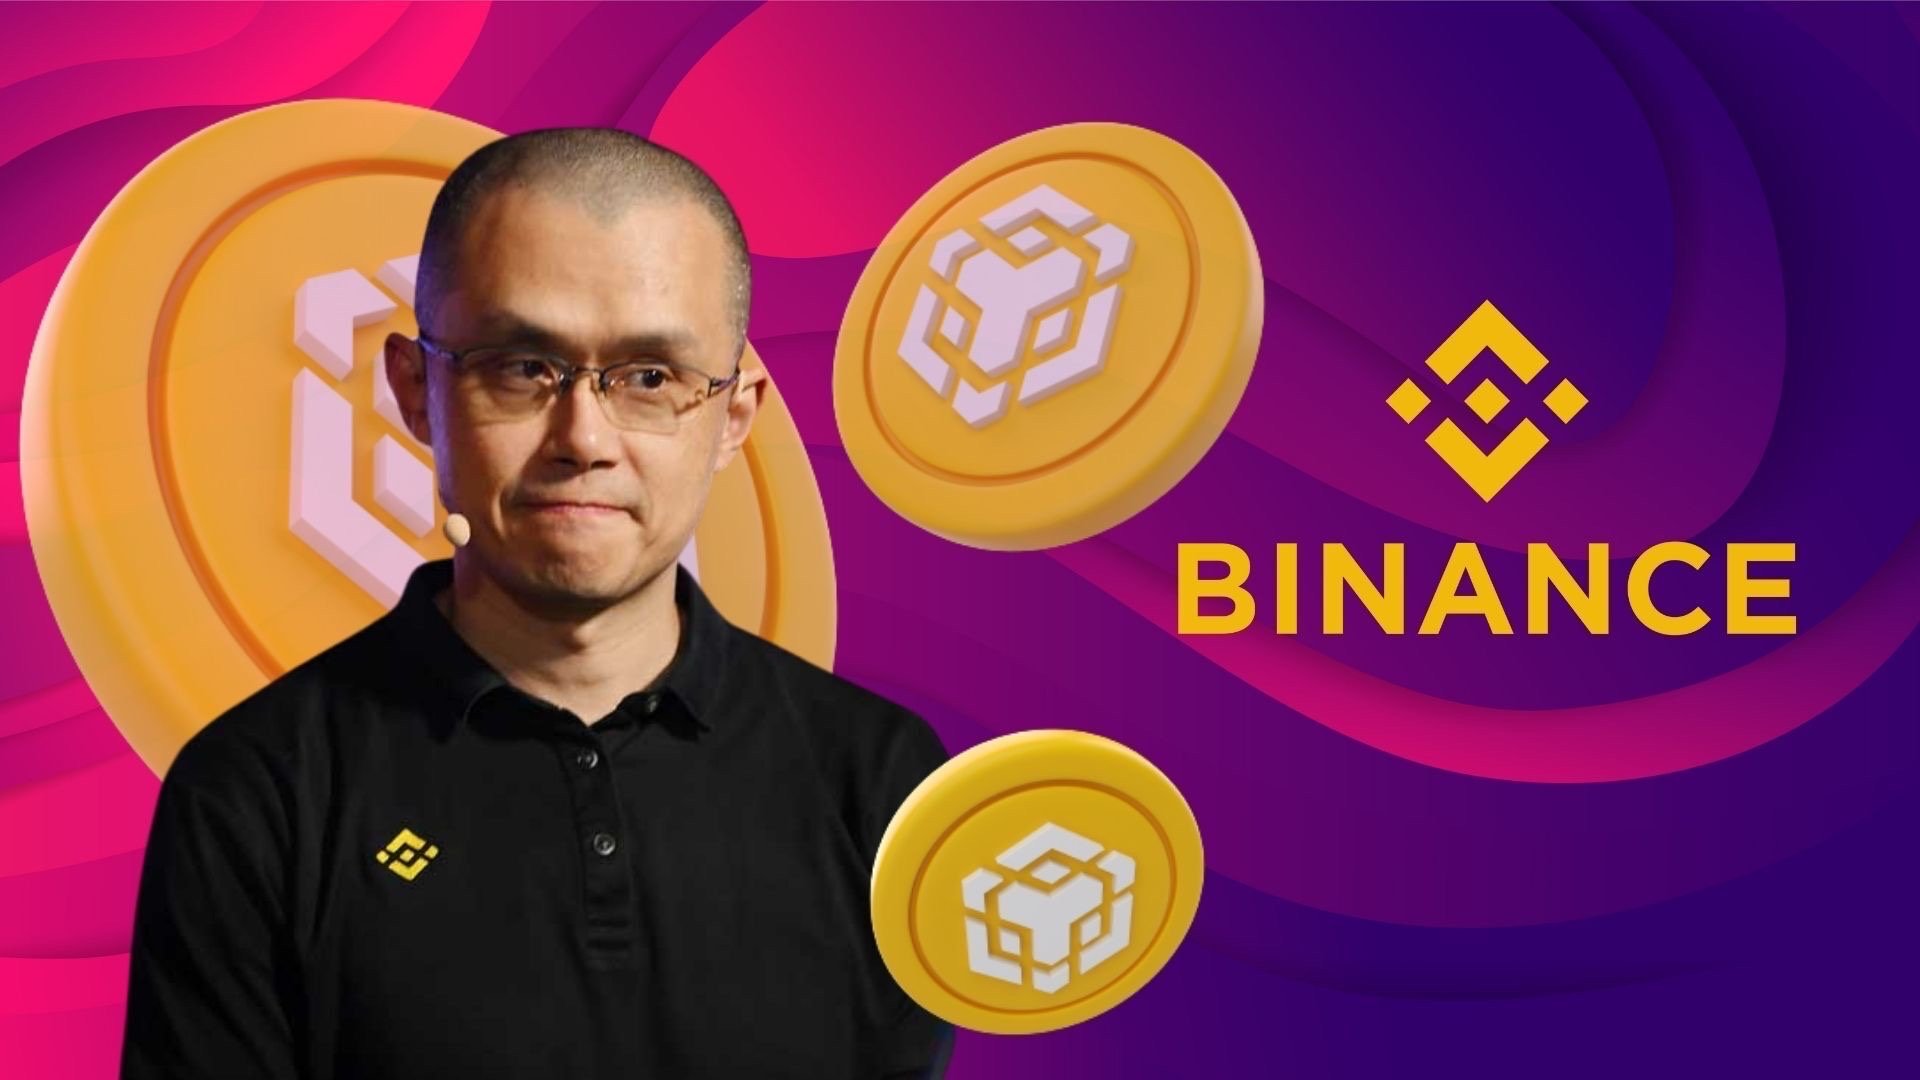 SEC Files 13 Charges Against Binance for Manipulation and Lack of Disclosure